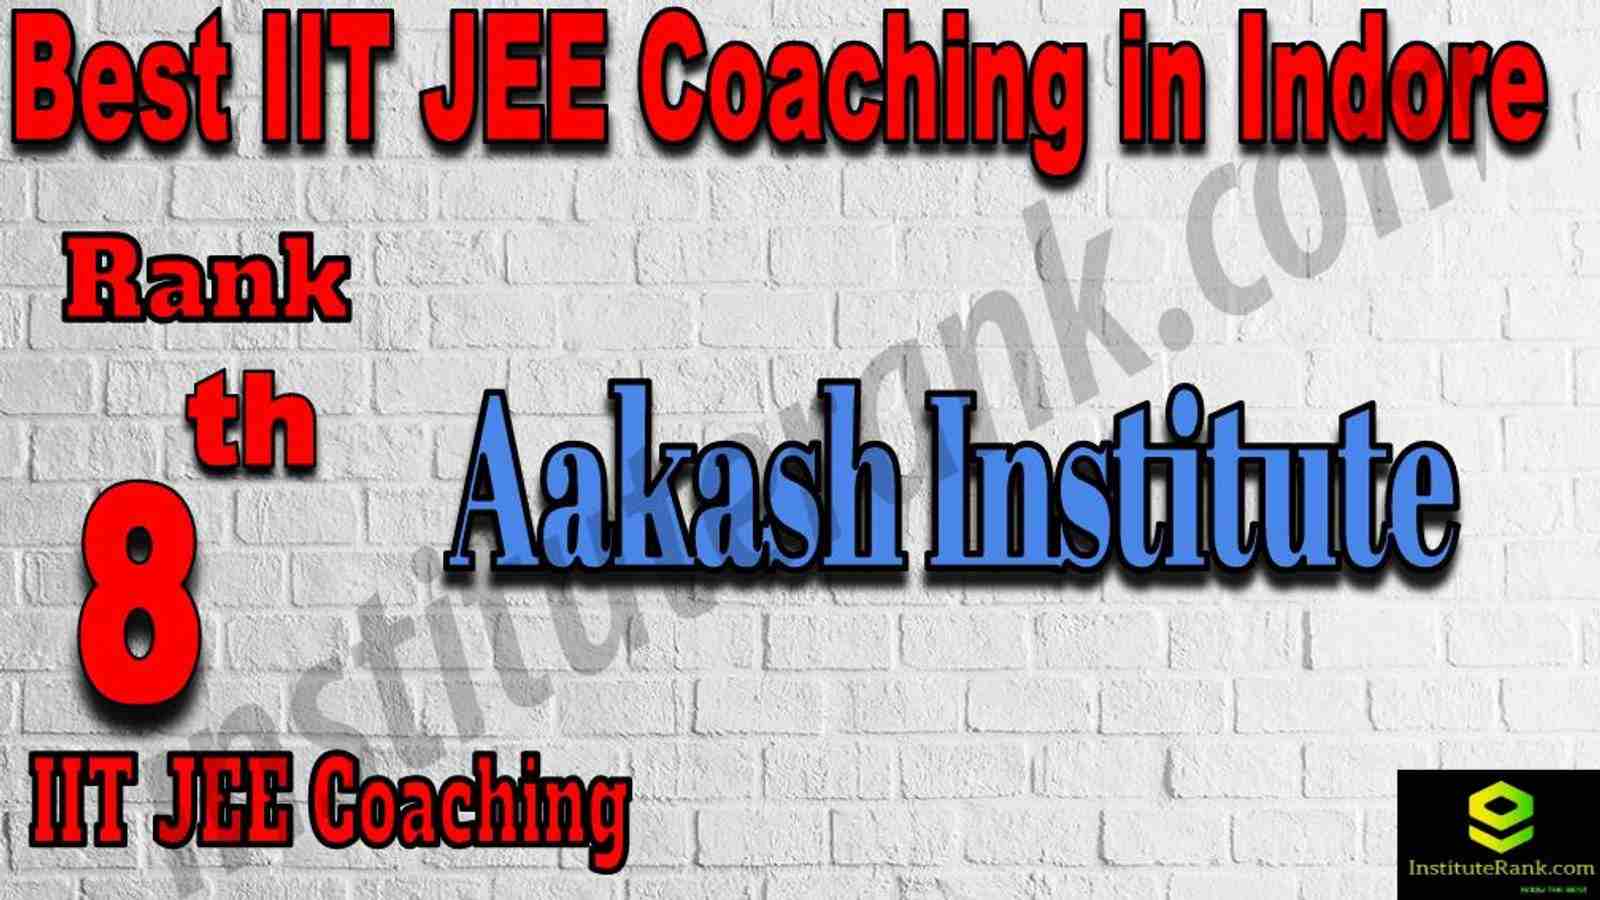 8th Best IIT JEE Coaching in Indore